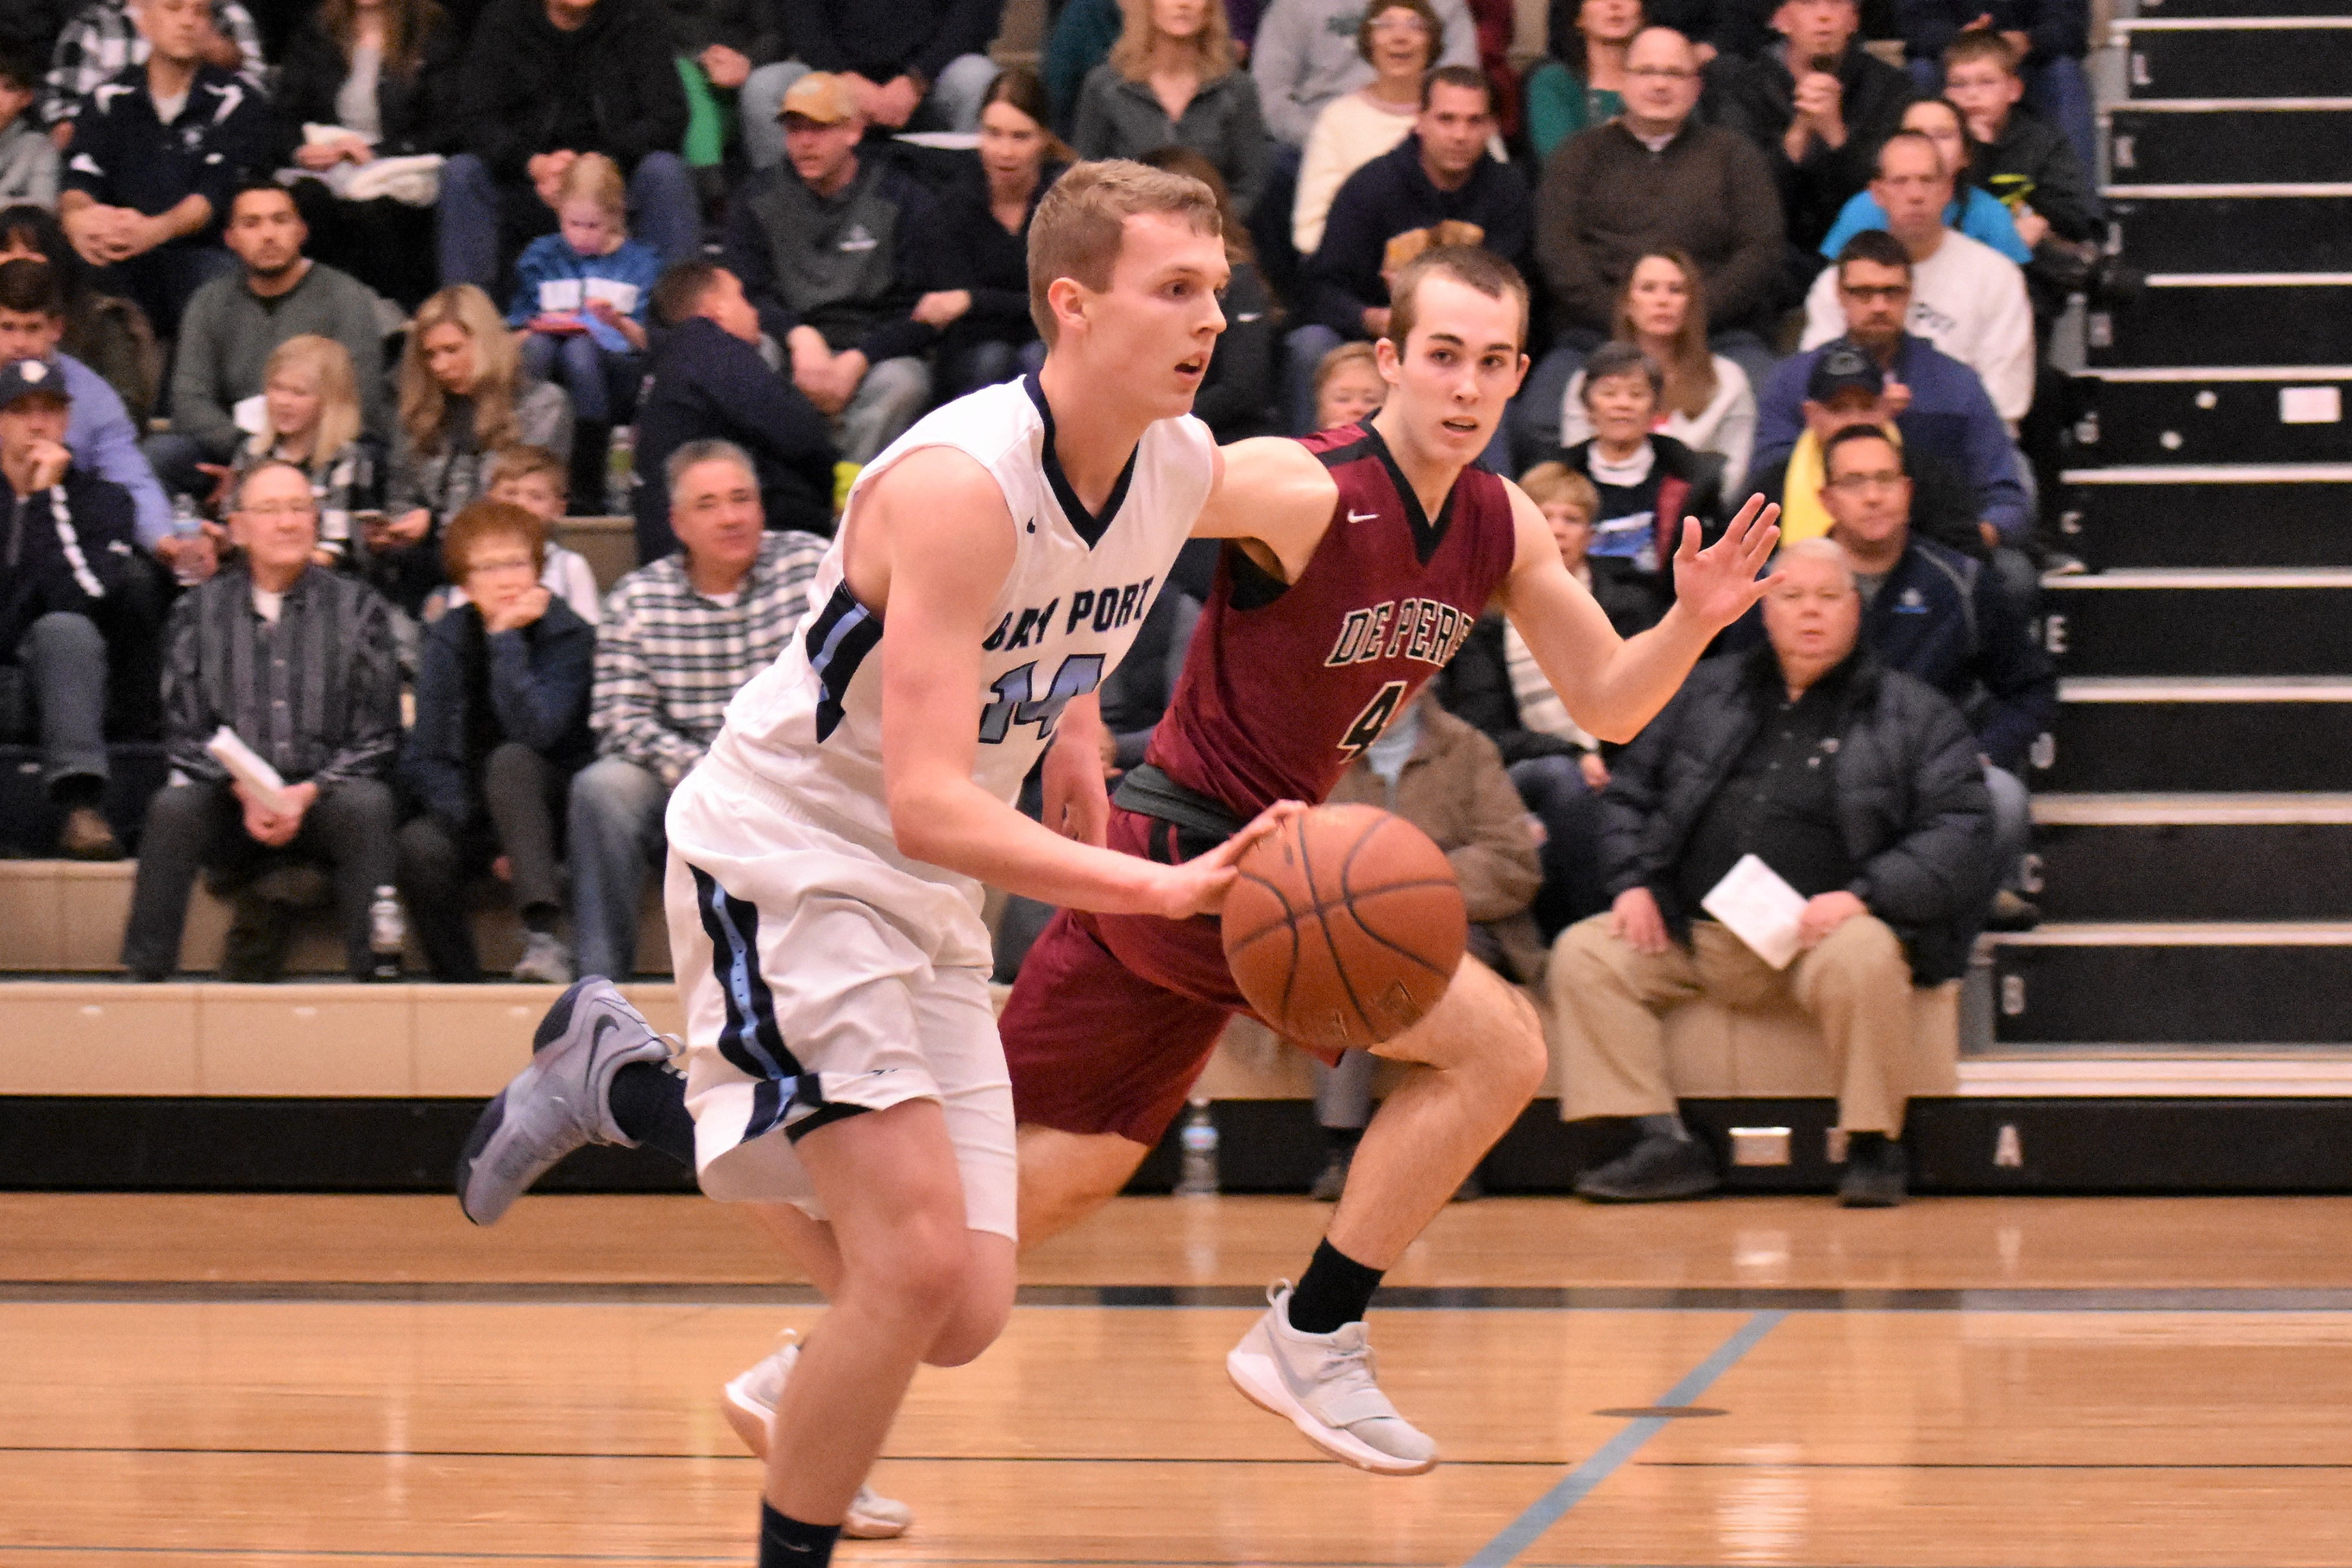 Pirates pull away from De Pere